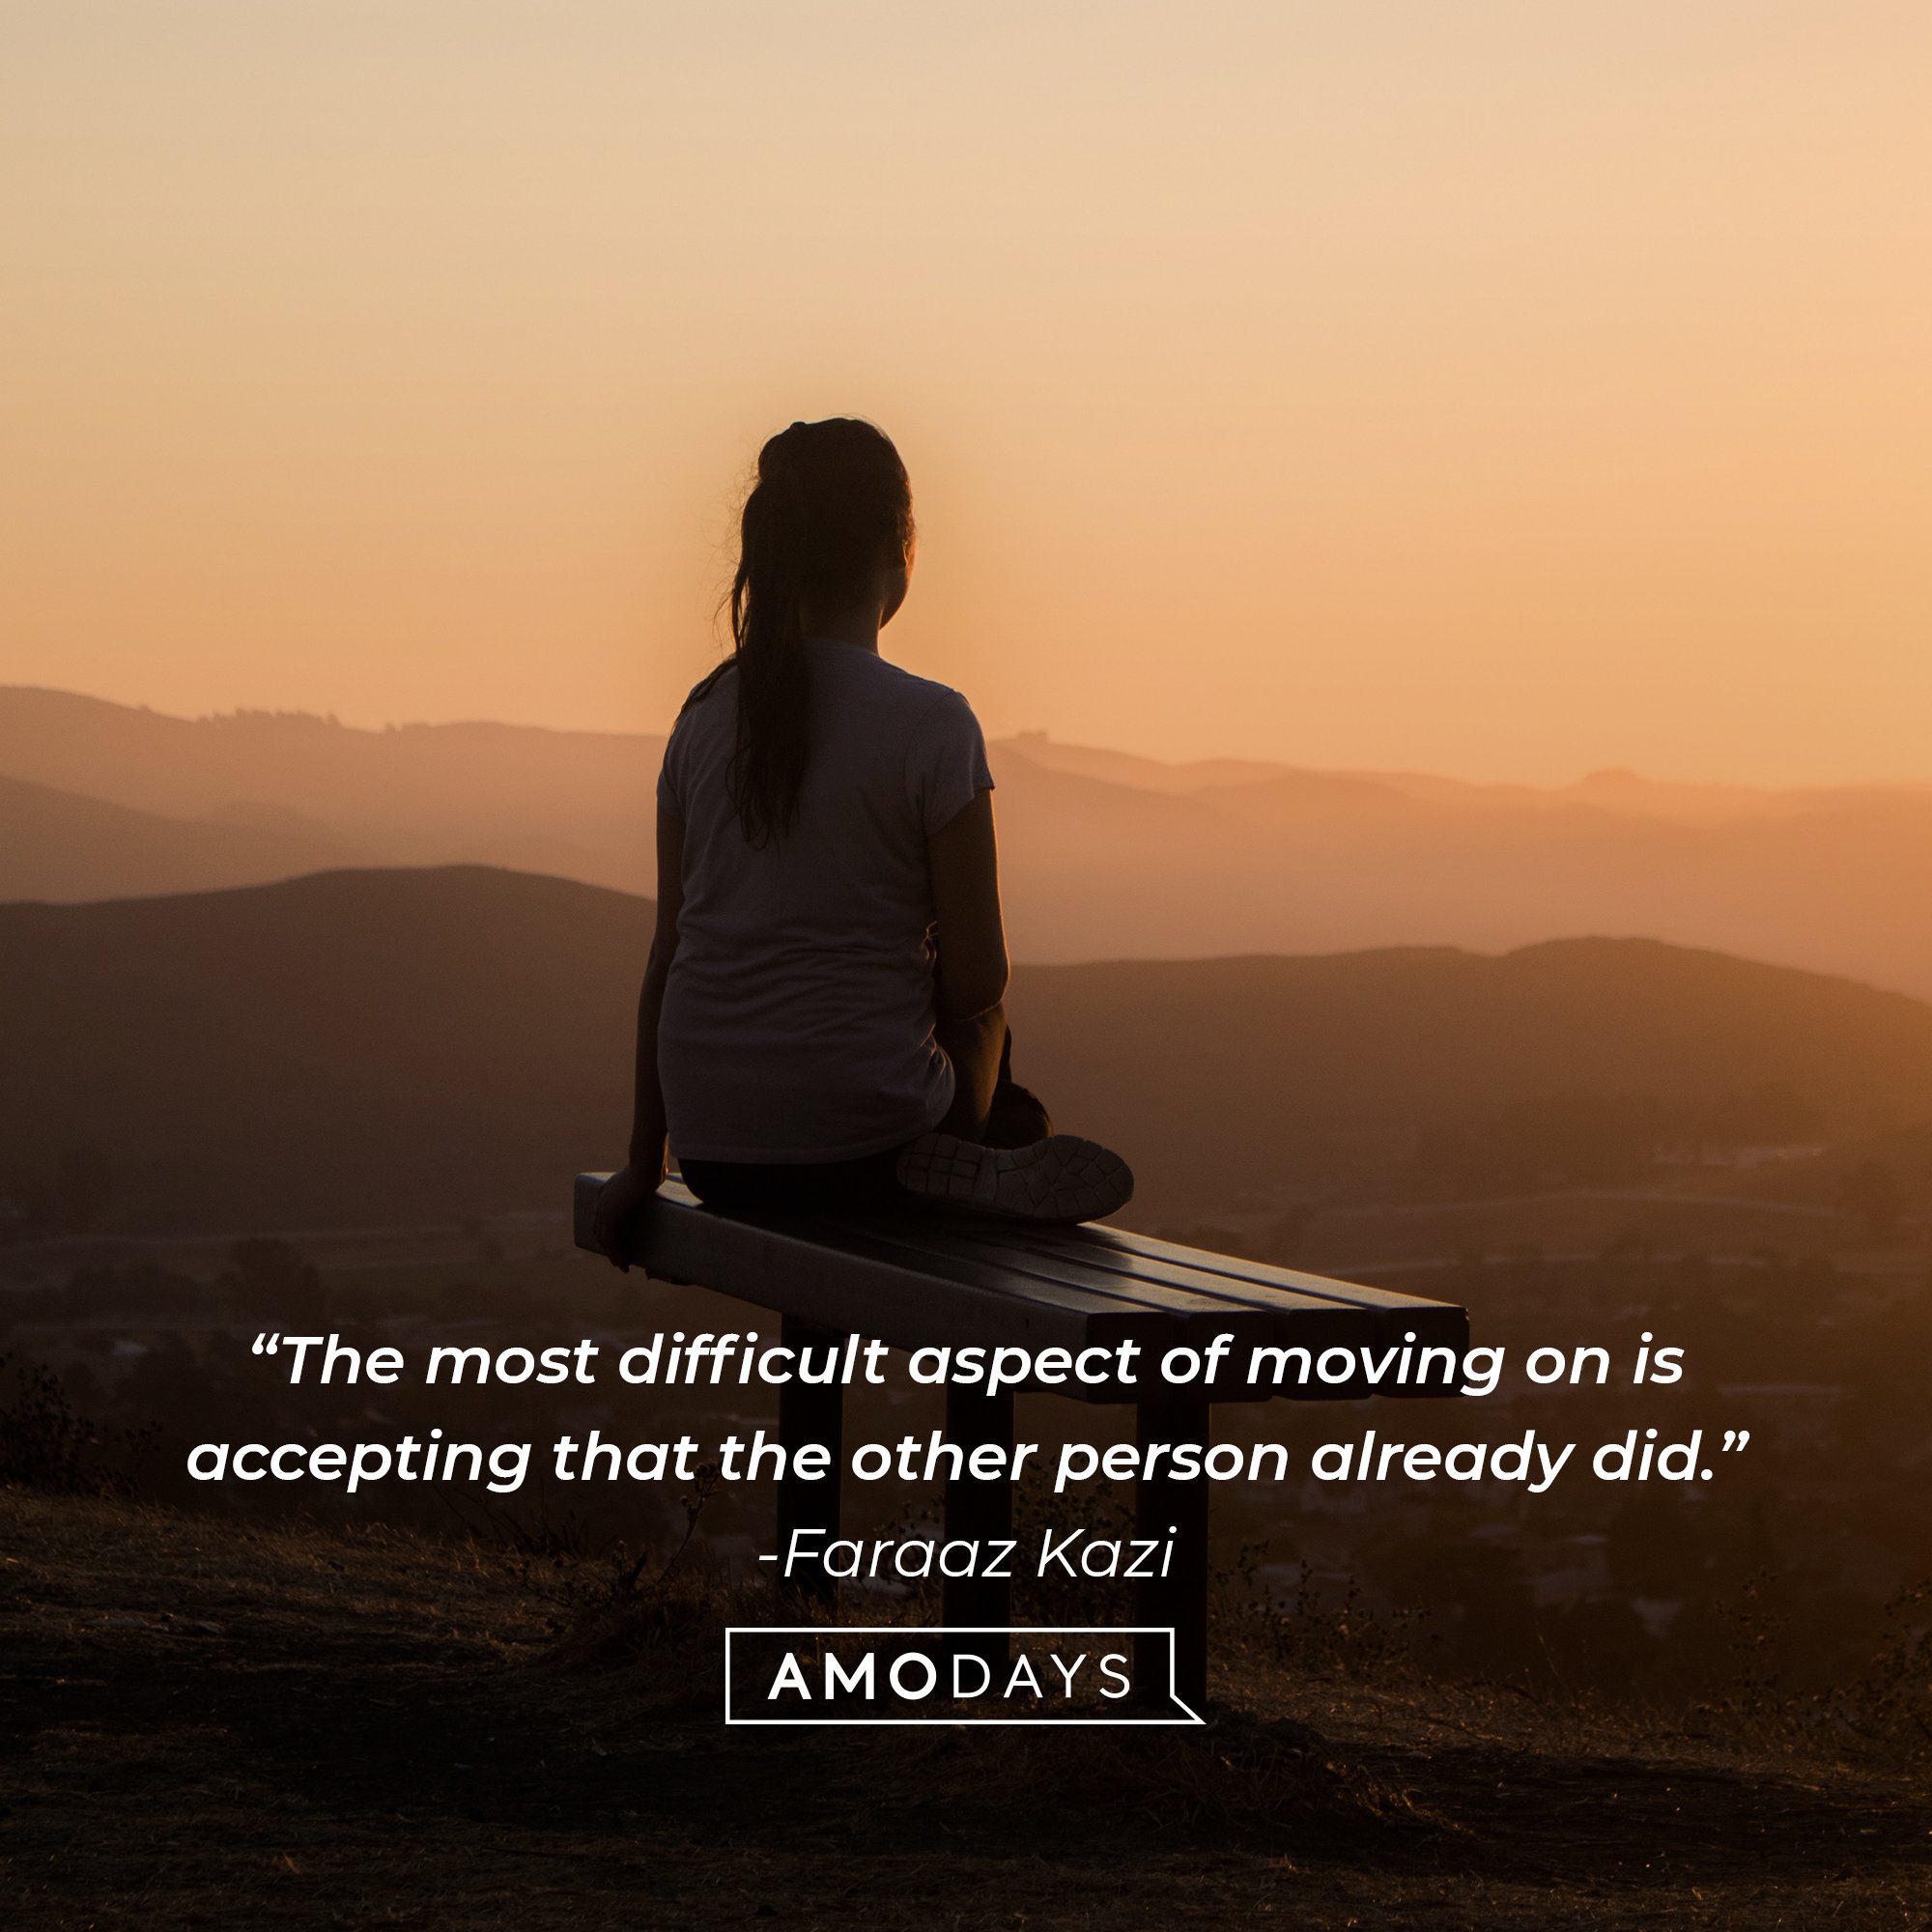 Faraaz Kazi's quote: “The most difficult aspect of moving on is accepting that the other person already did.” | Image: AmoDays